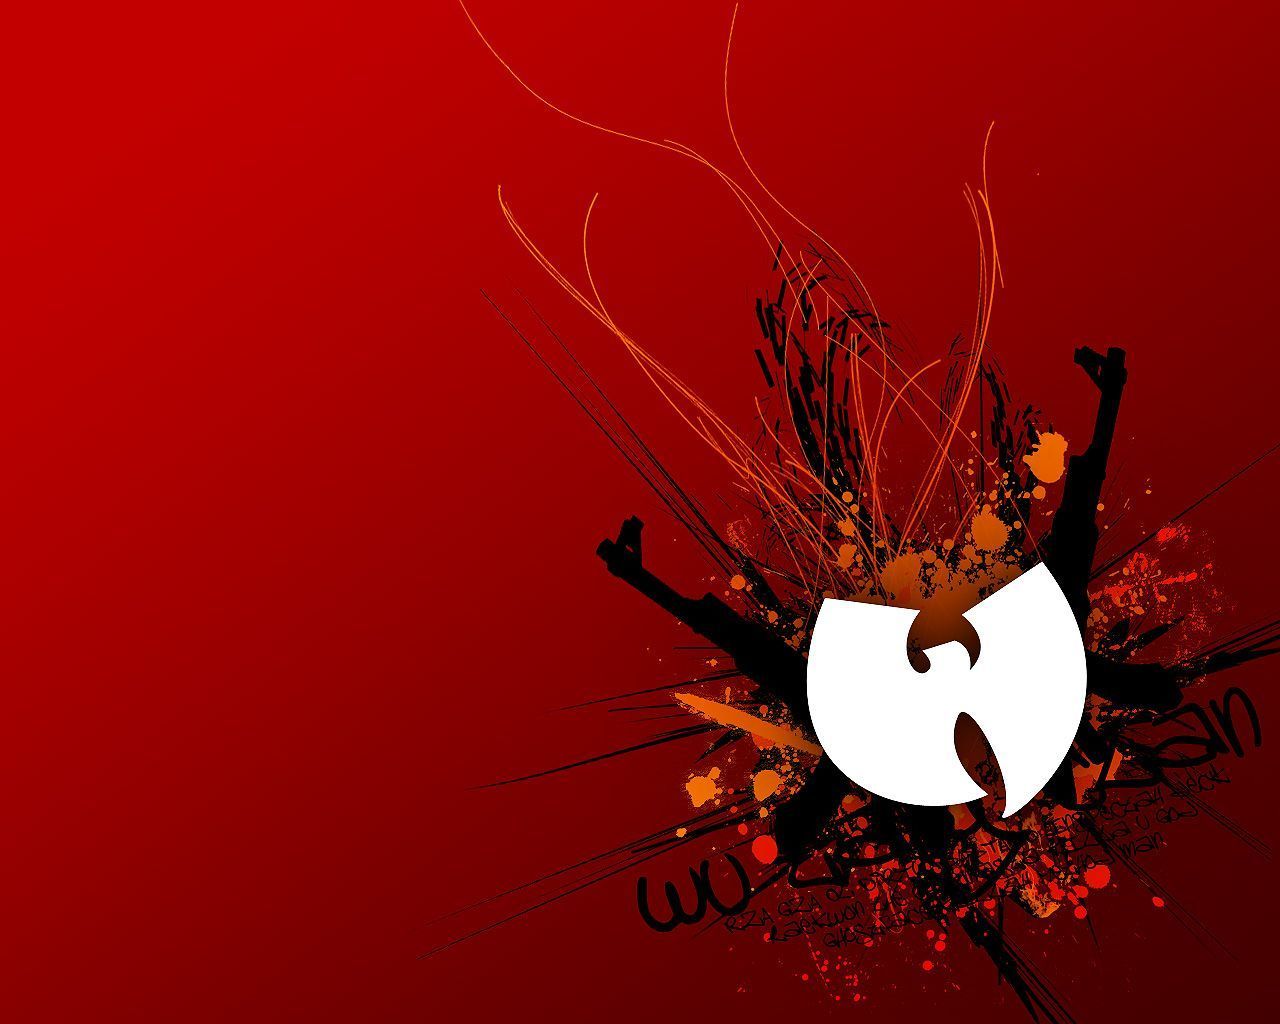 Wu tang clan wallpaper by onemicGfx on DeviantArt